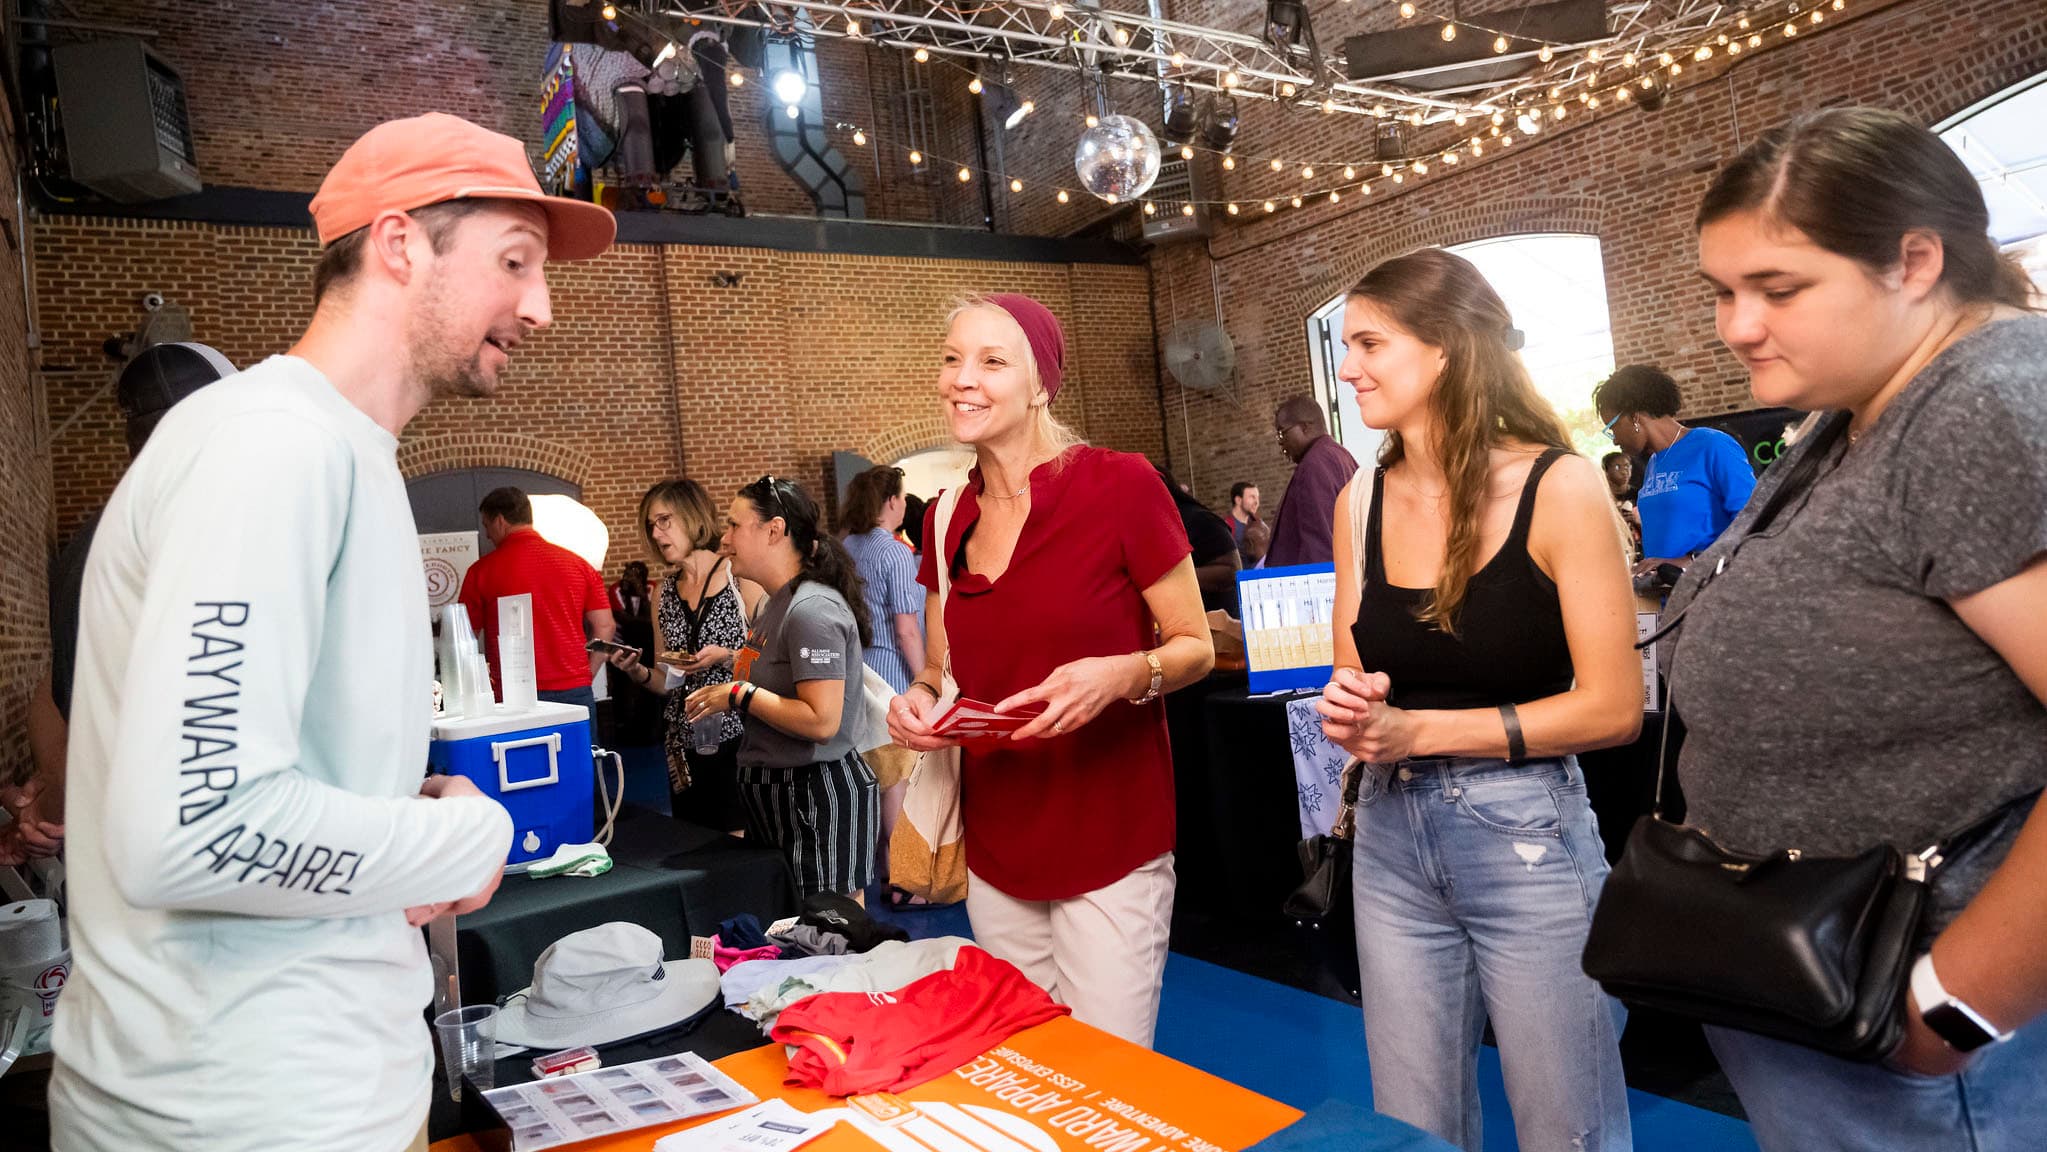 Devin Regan, founder of Rayward Apparel, speaks to visitors of his table at the 2022 Terrapin Tastefest in Baltimore.